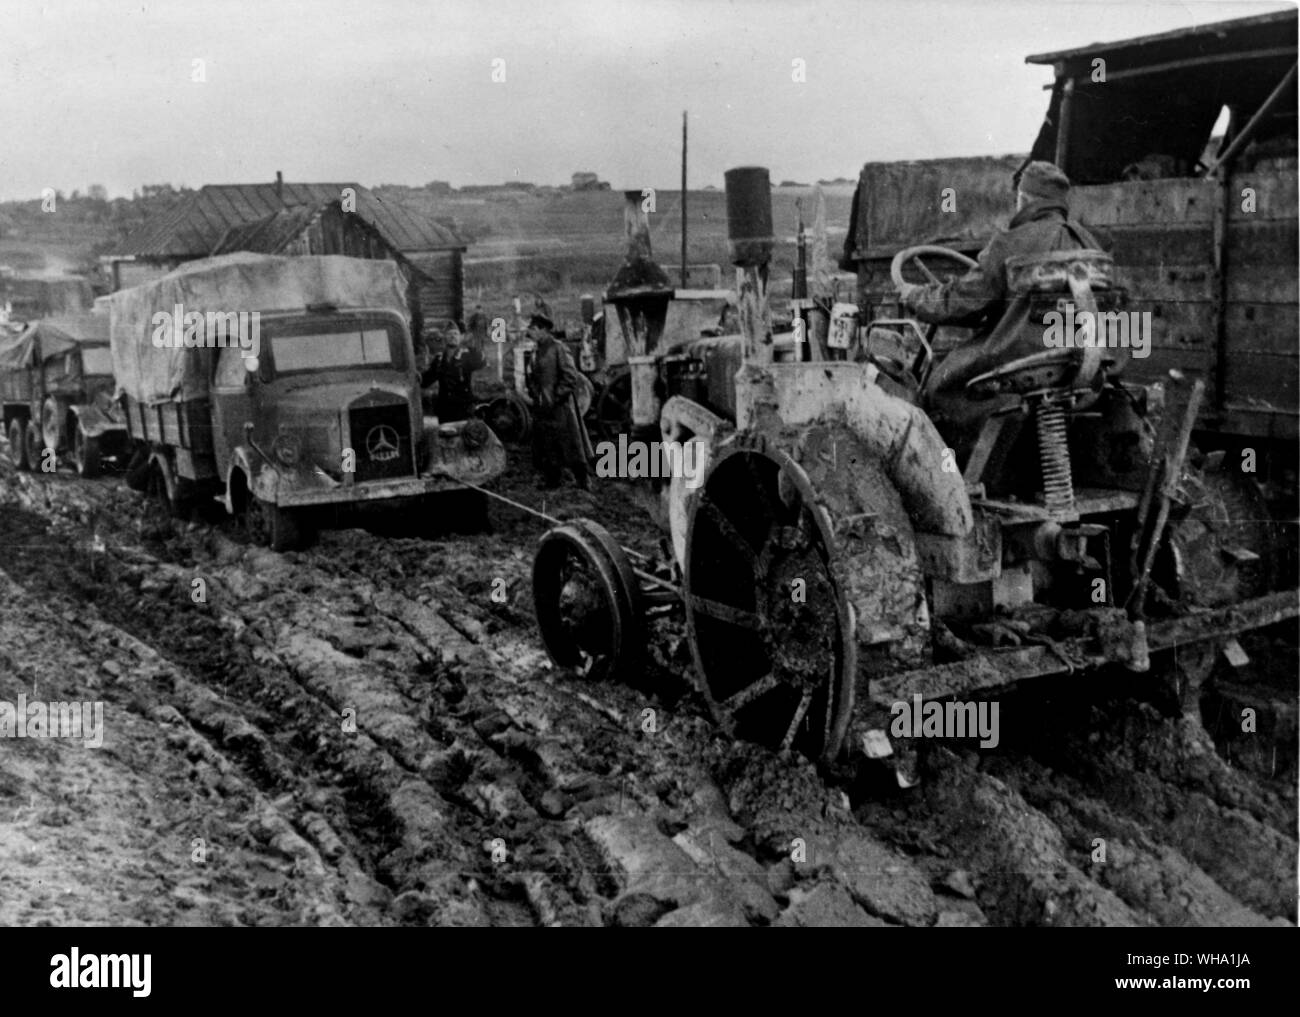 WW2: General Mud on the Eastern battle-front. Swampy terrain of Russia during the autumnal rains. German army lorries get stuck on a muddy road on the Eastern Front, have to be pulled out by a transport tractor. Stock Photo